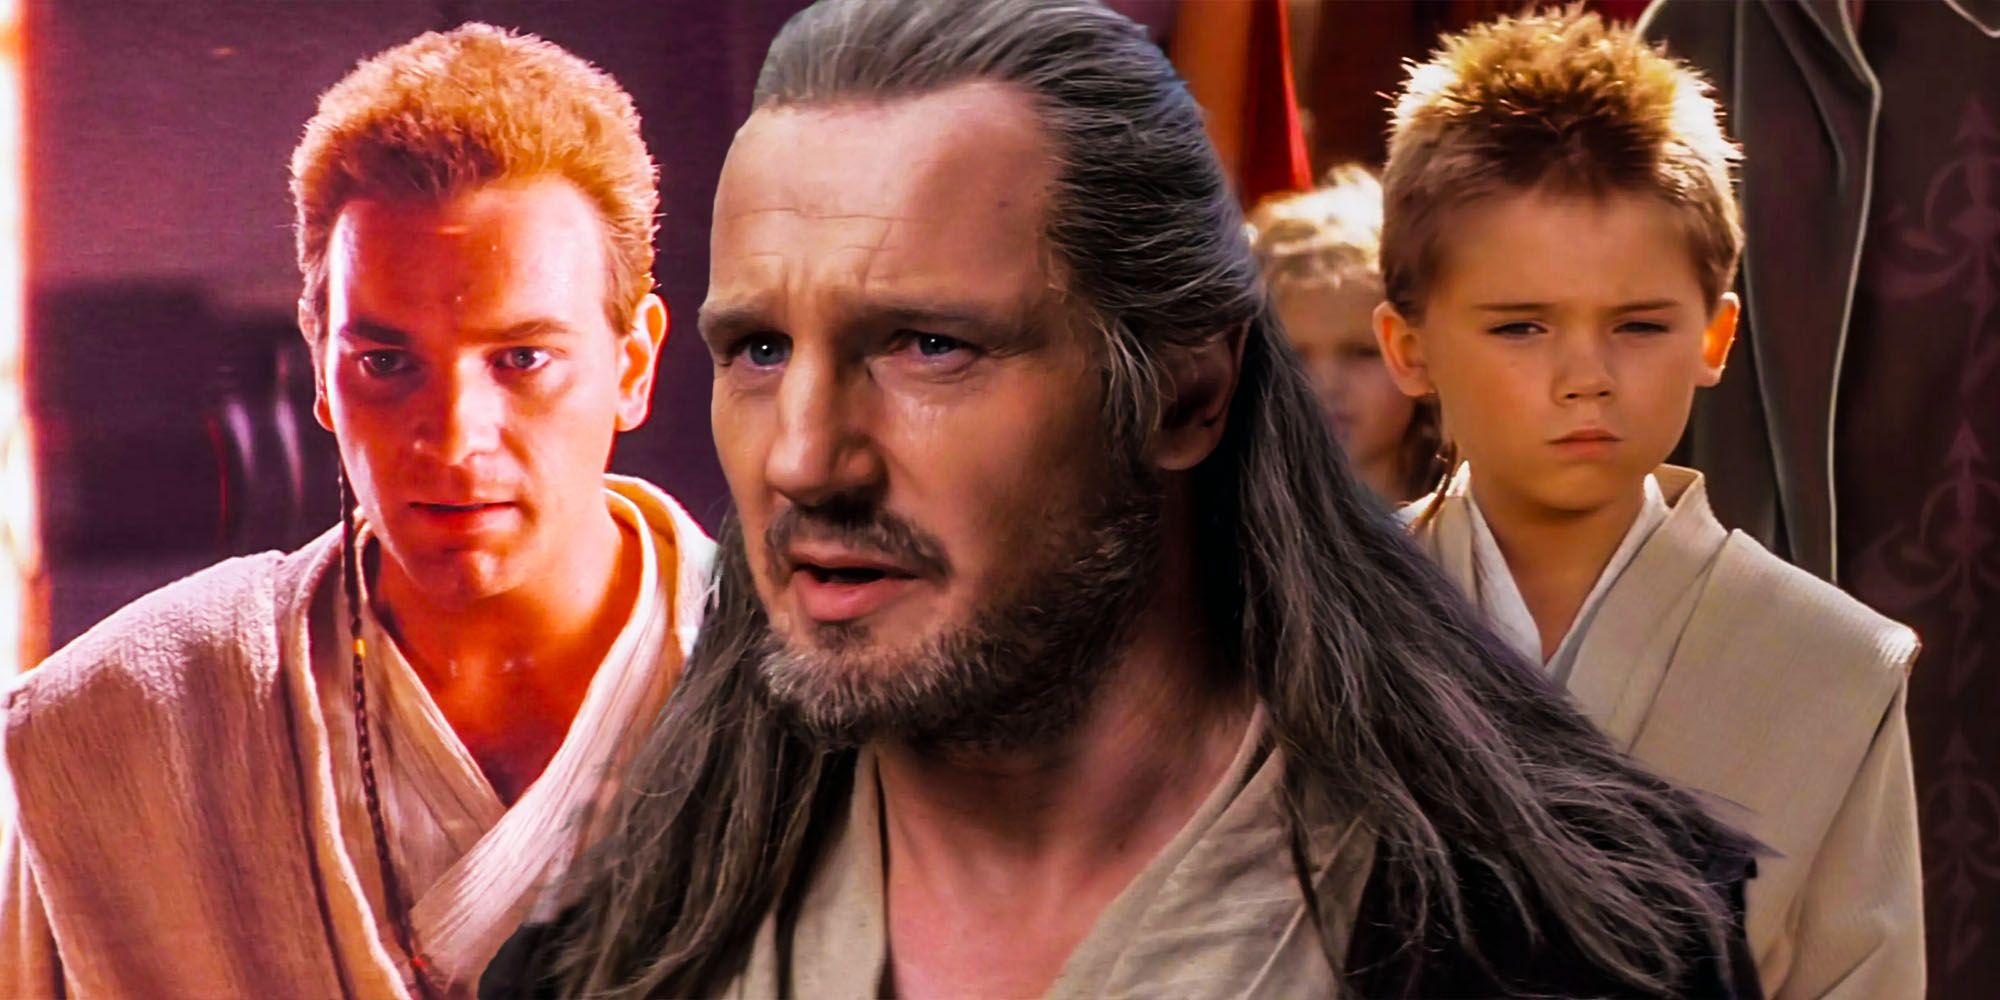 Was Qui-Gon Jinn a terrible character in the Star Wars prequels? - Quora